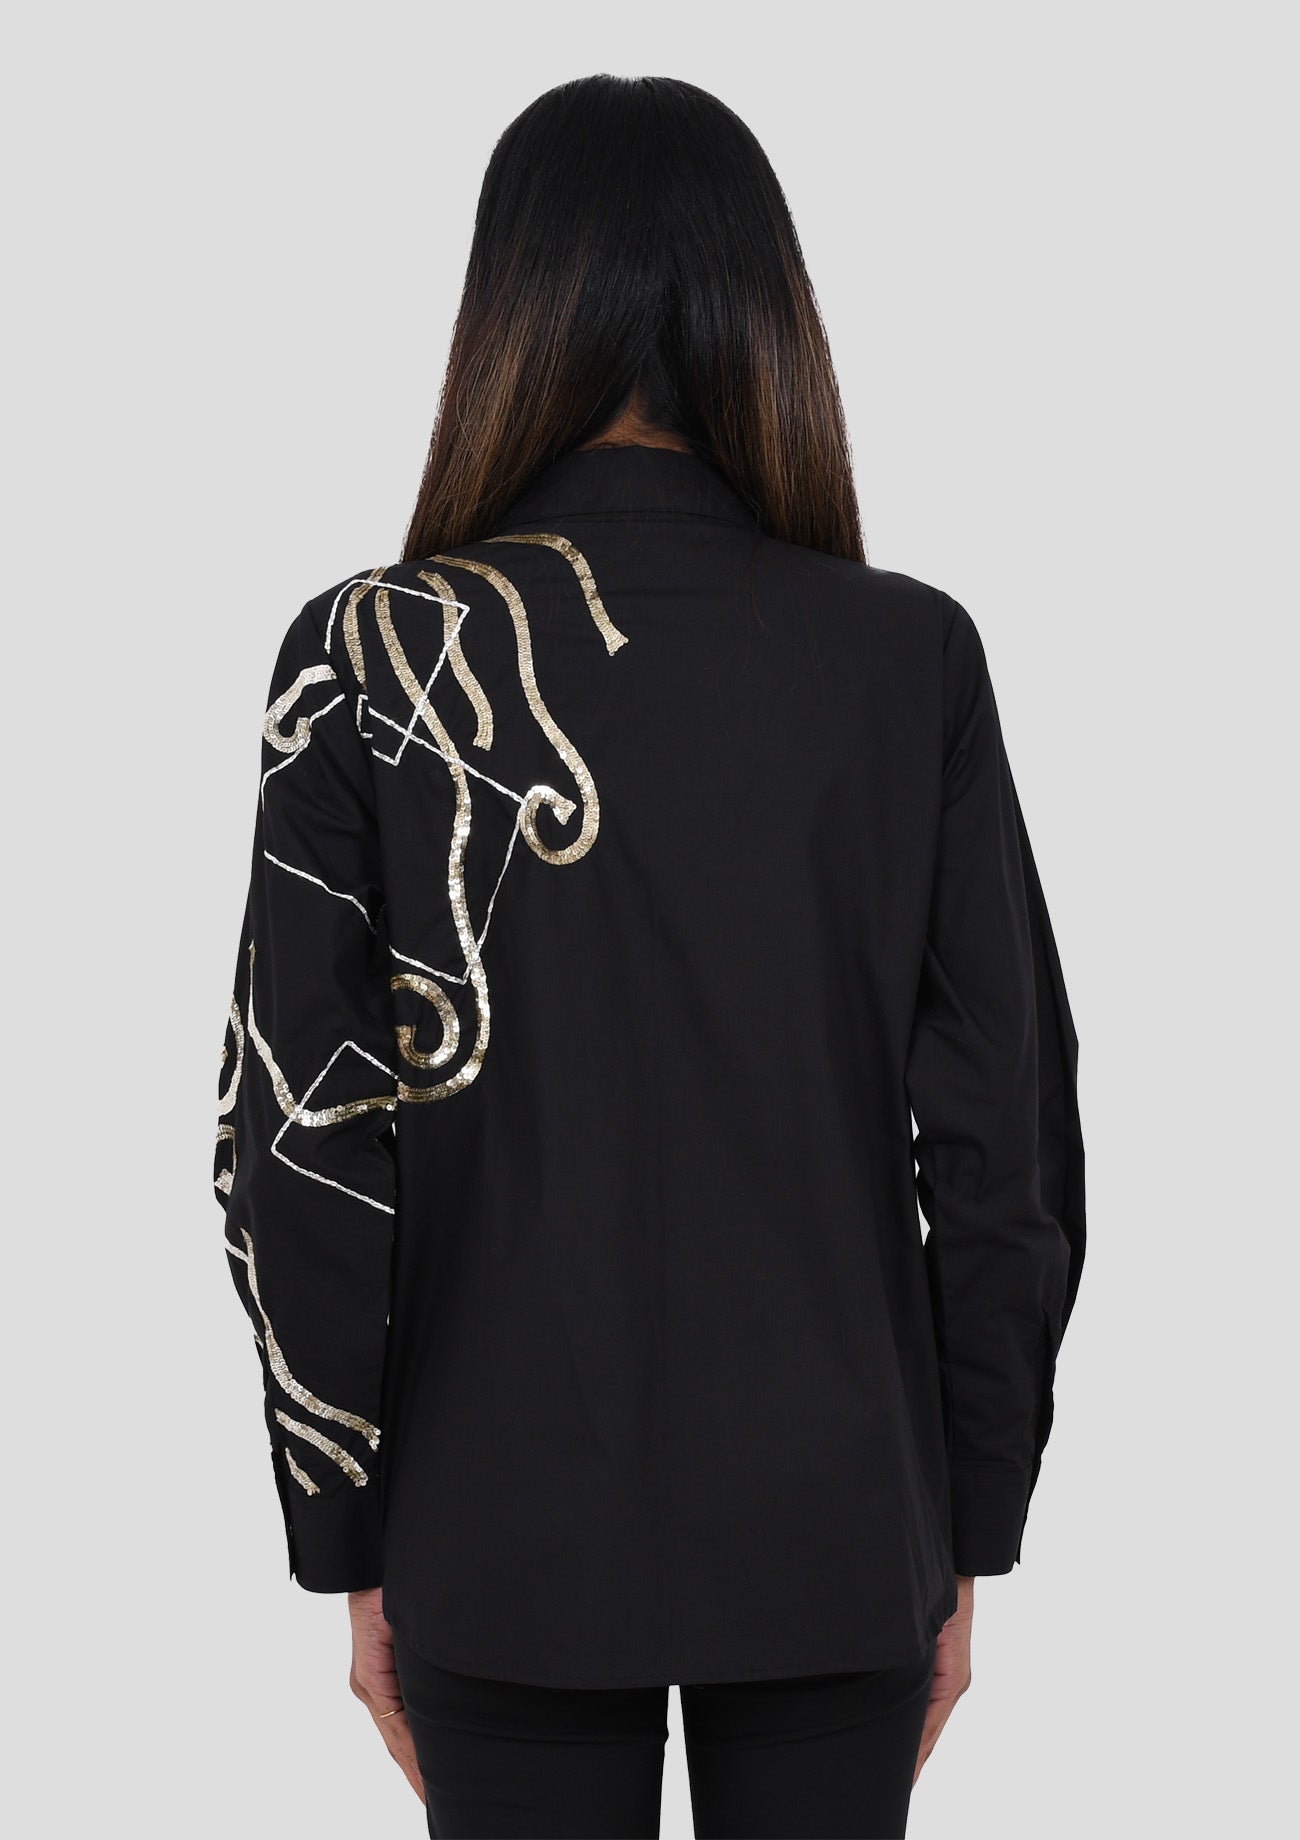 Black Cotton Shirt With Abstract Sequins Embroidery Front And Back